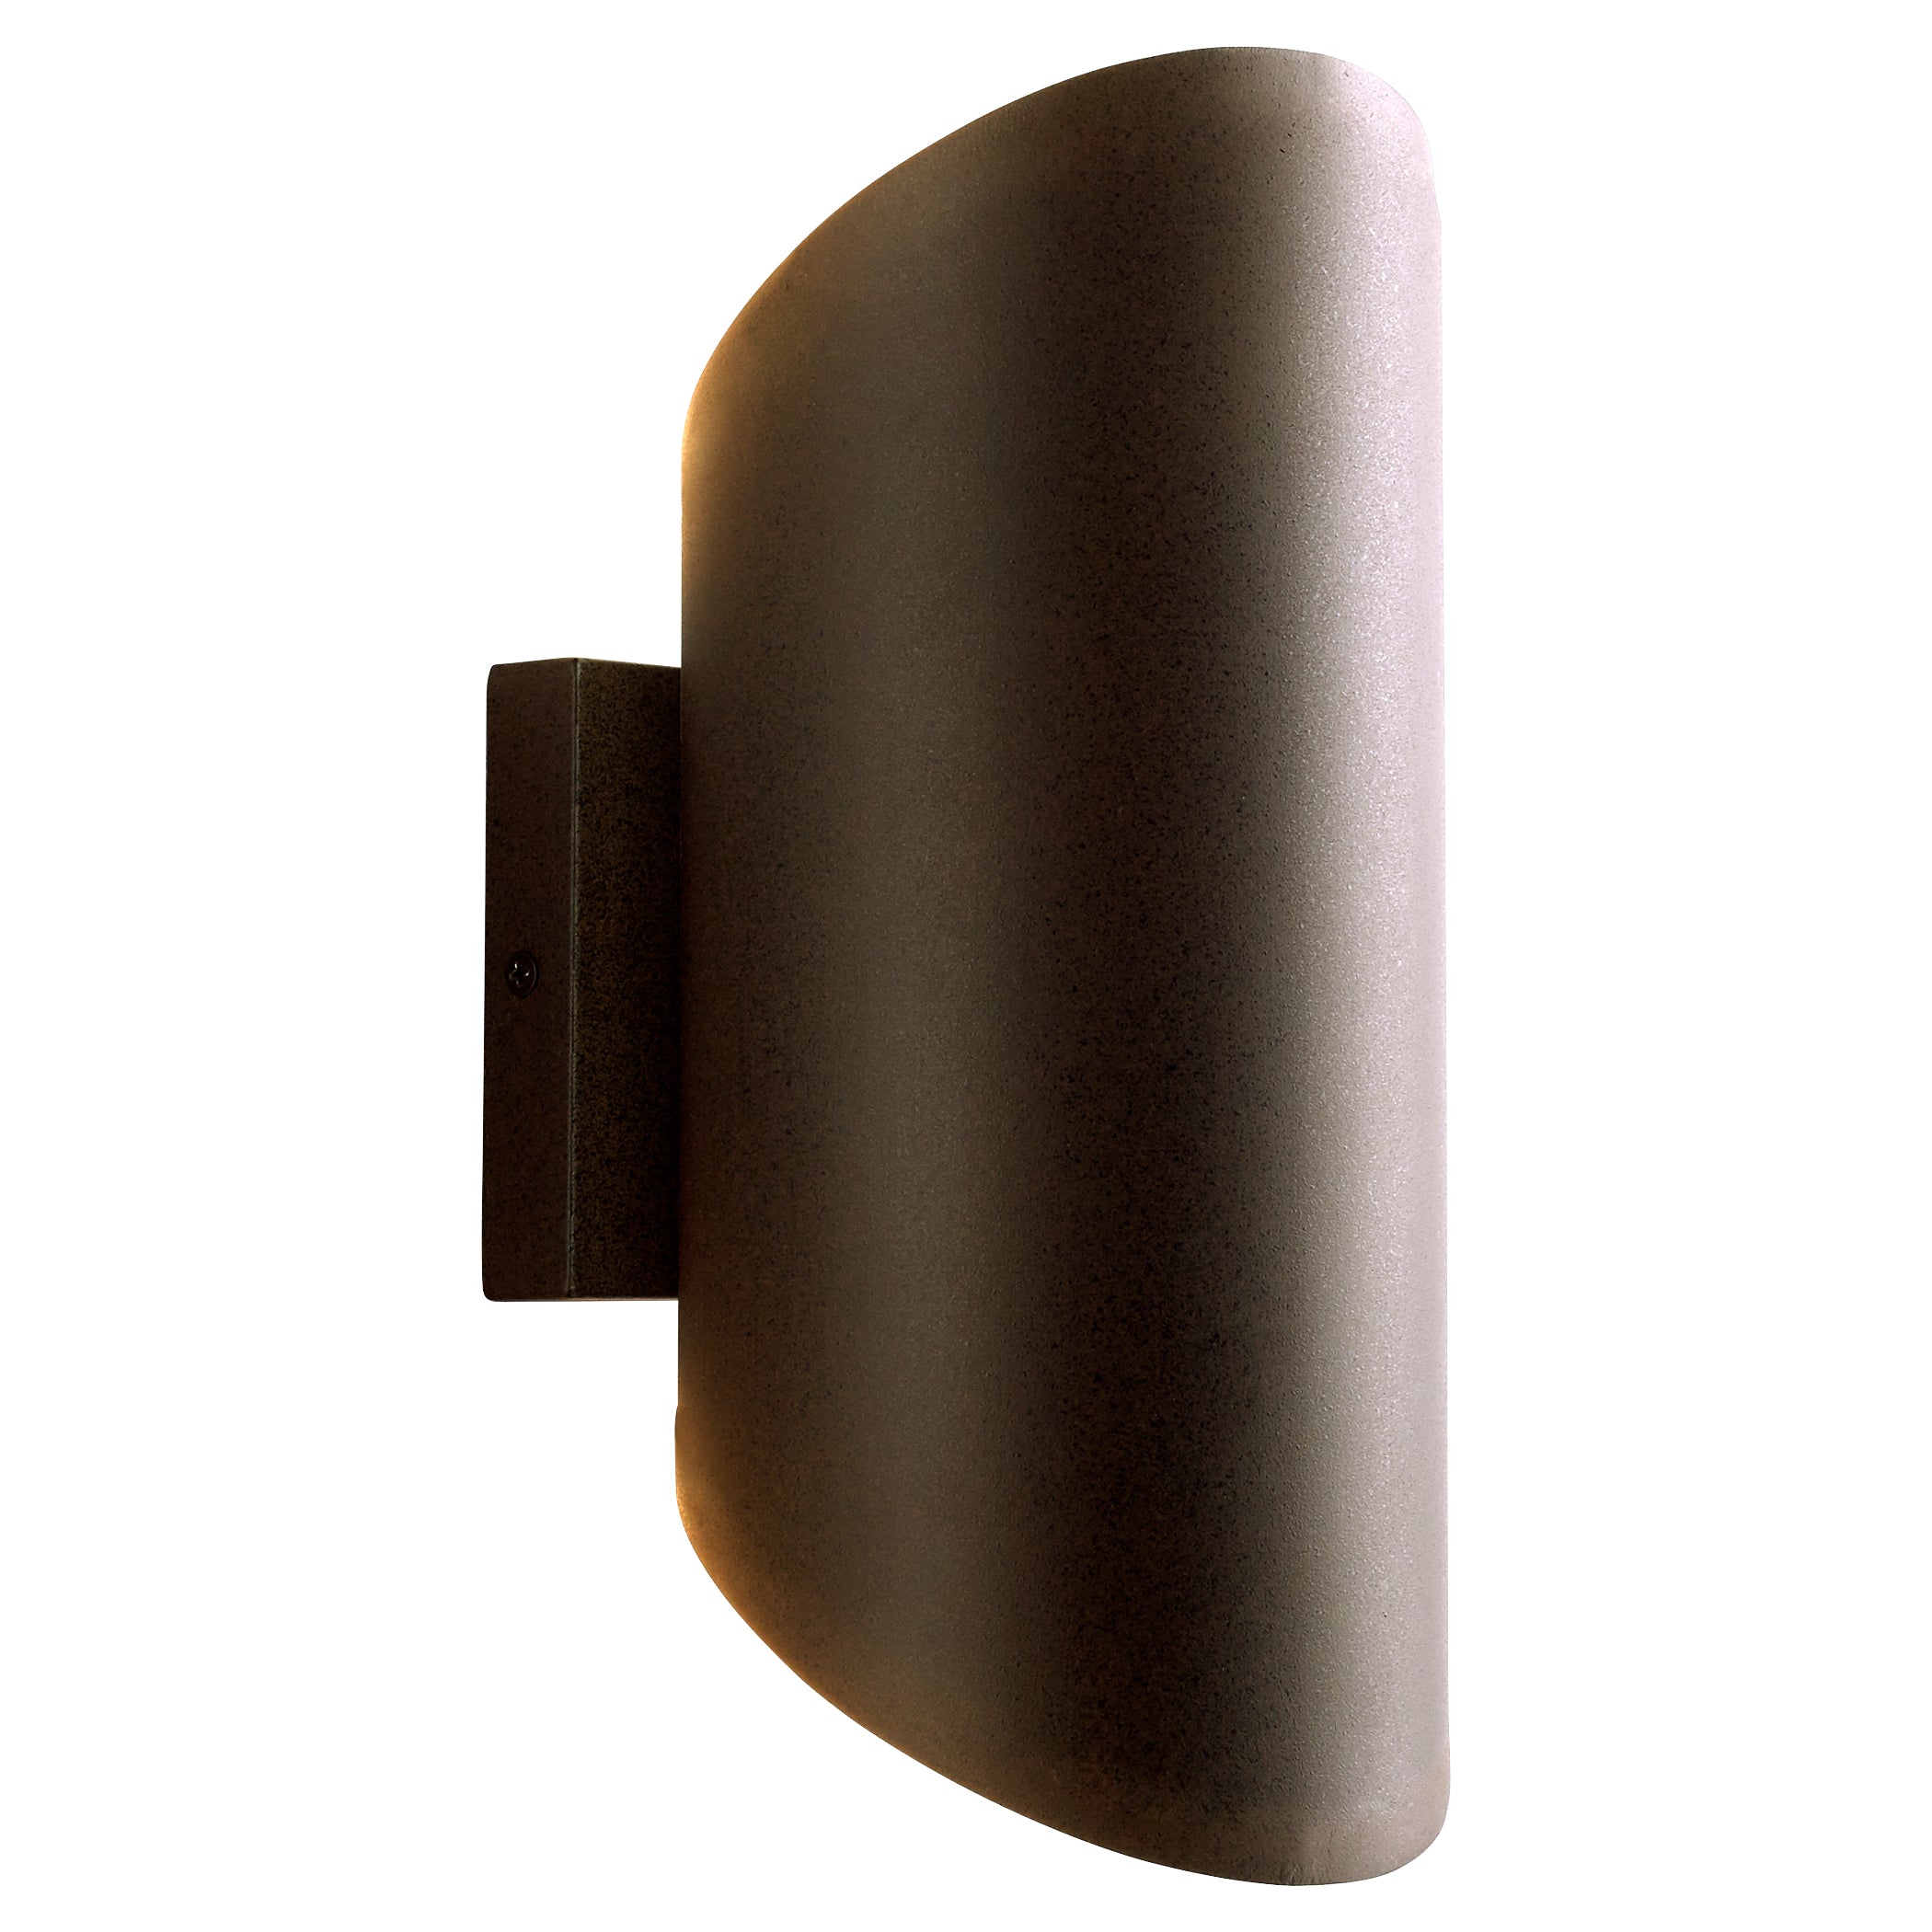 Oxygen Scope 3-752-22 Outdoor Wall Sconce Light - Oiled Bronze